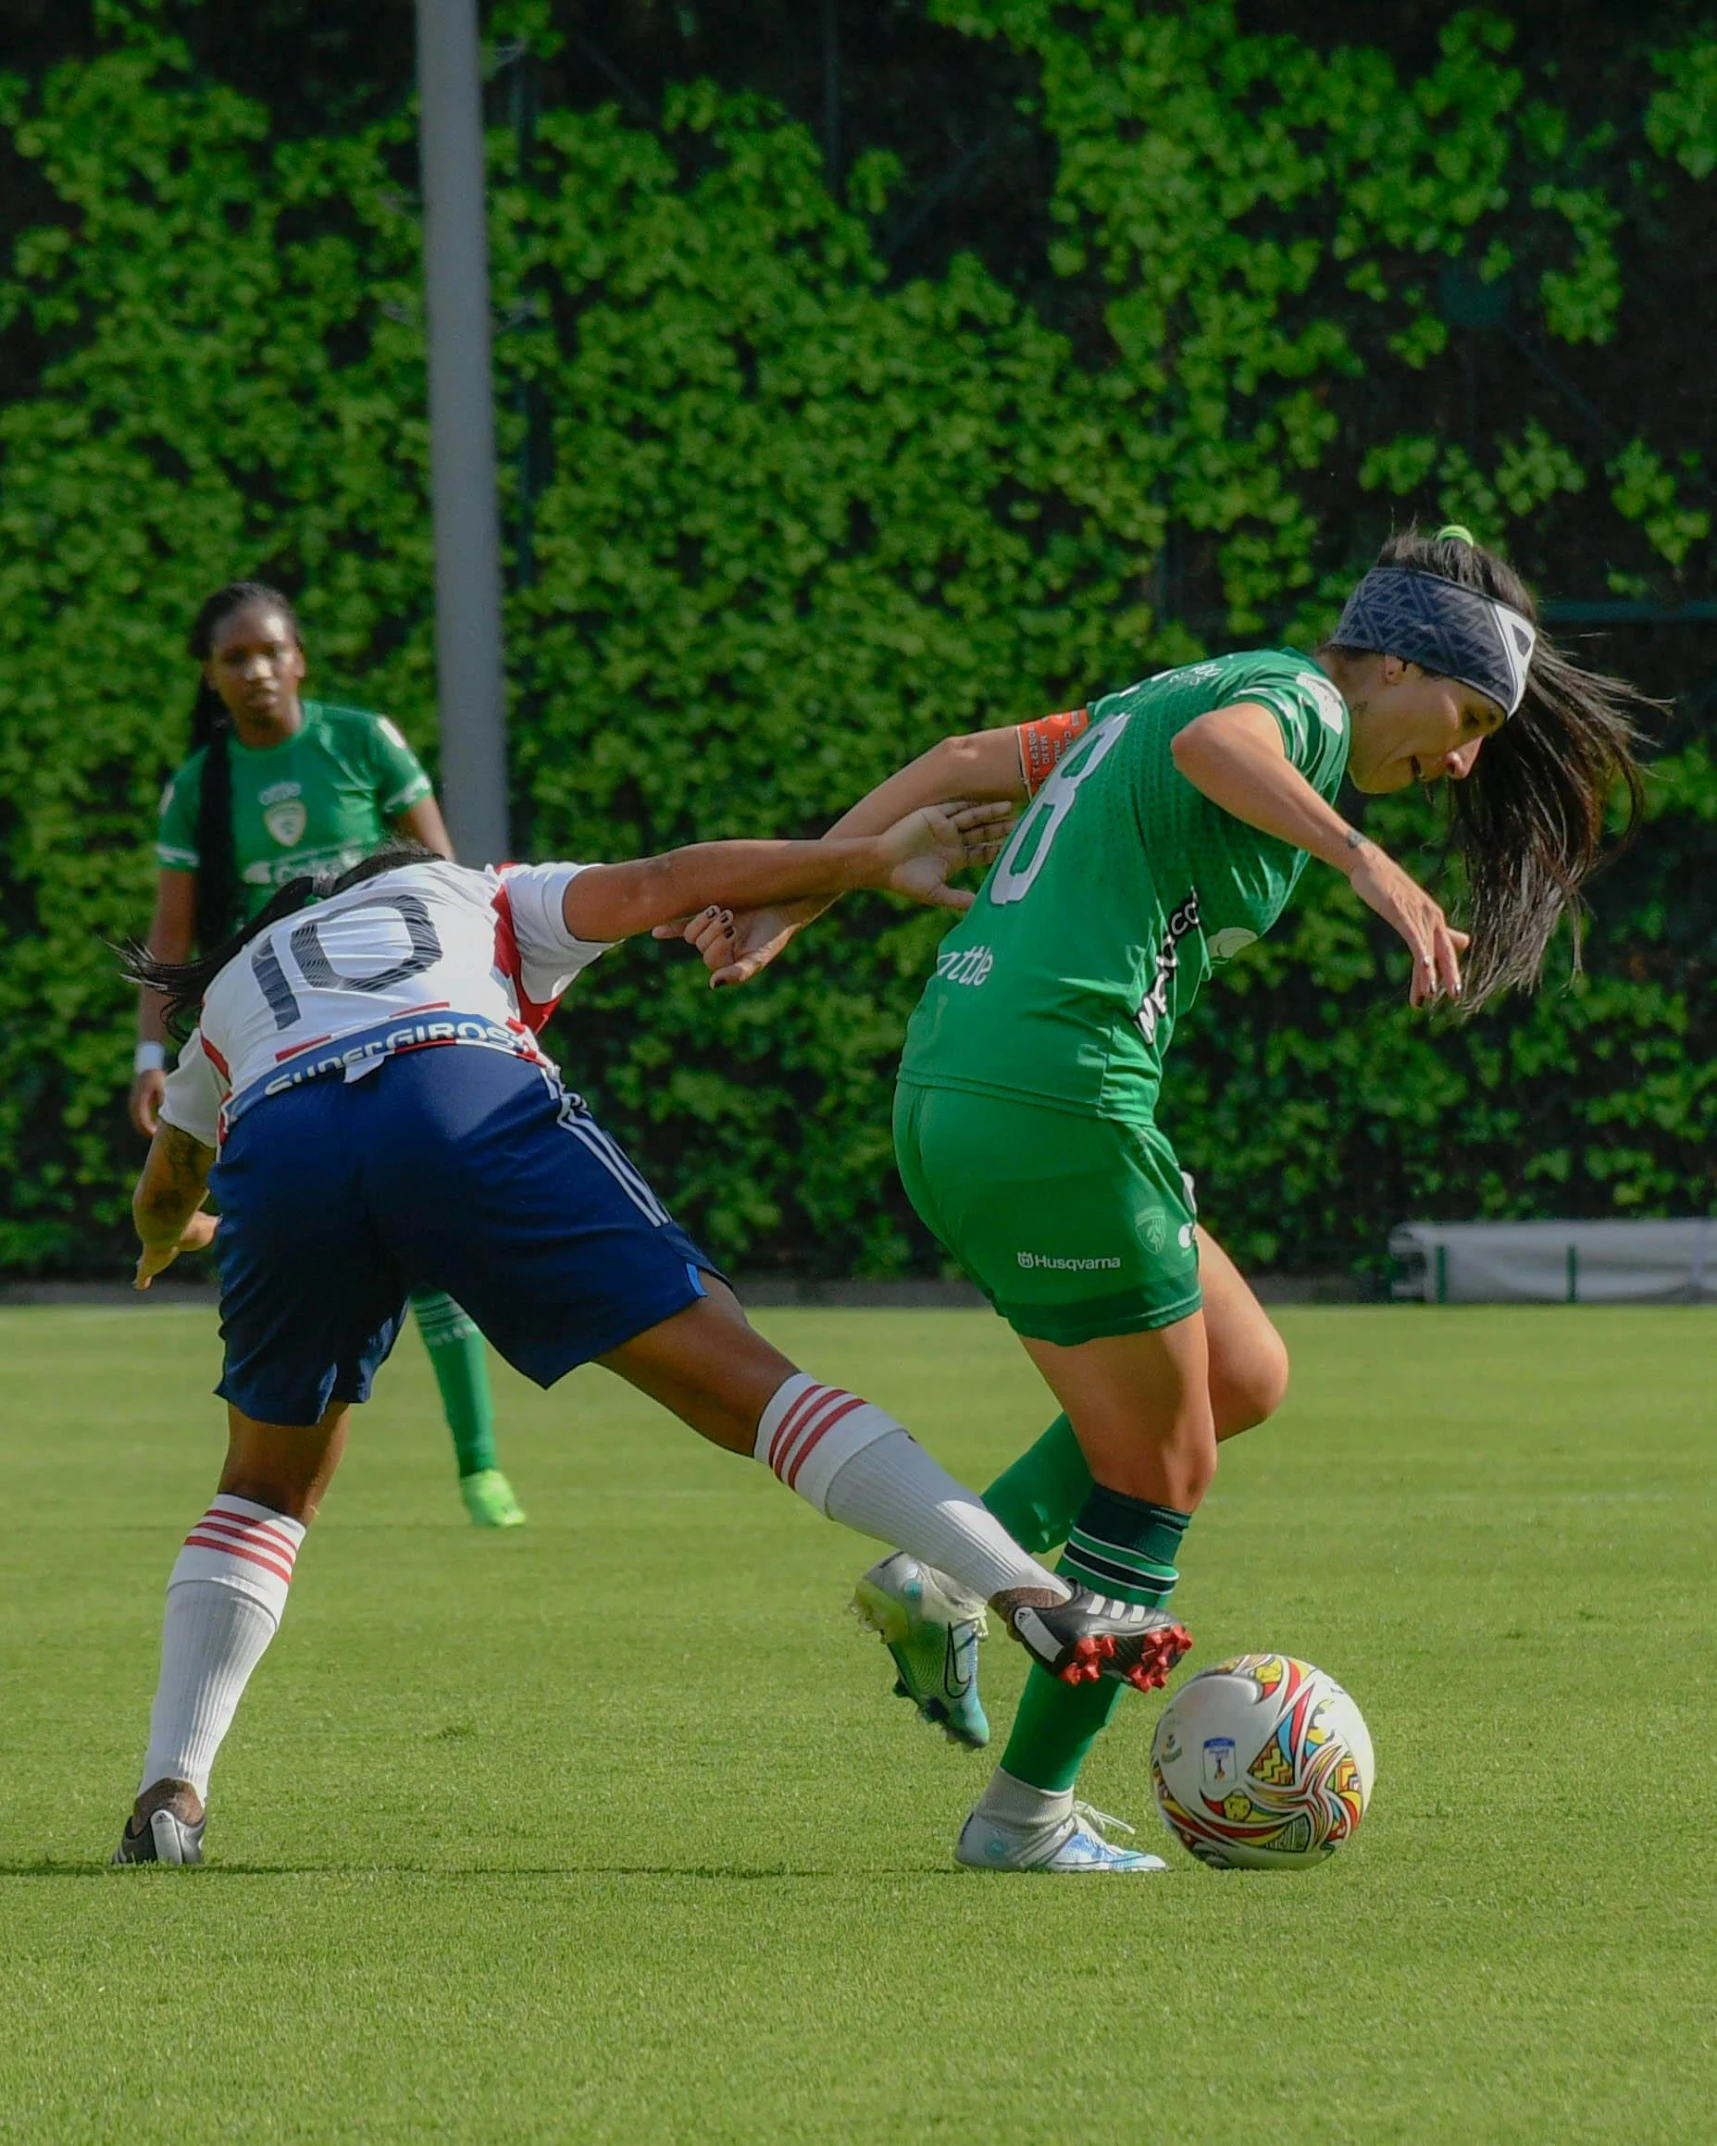 a woman soccer player tries to get past the other team